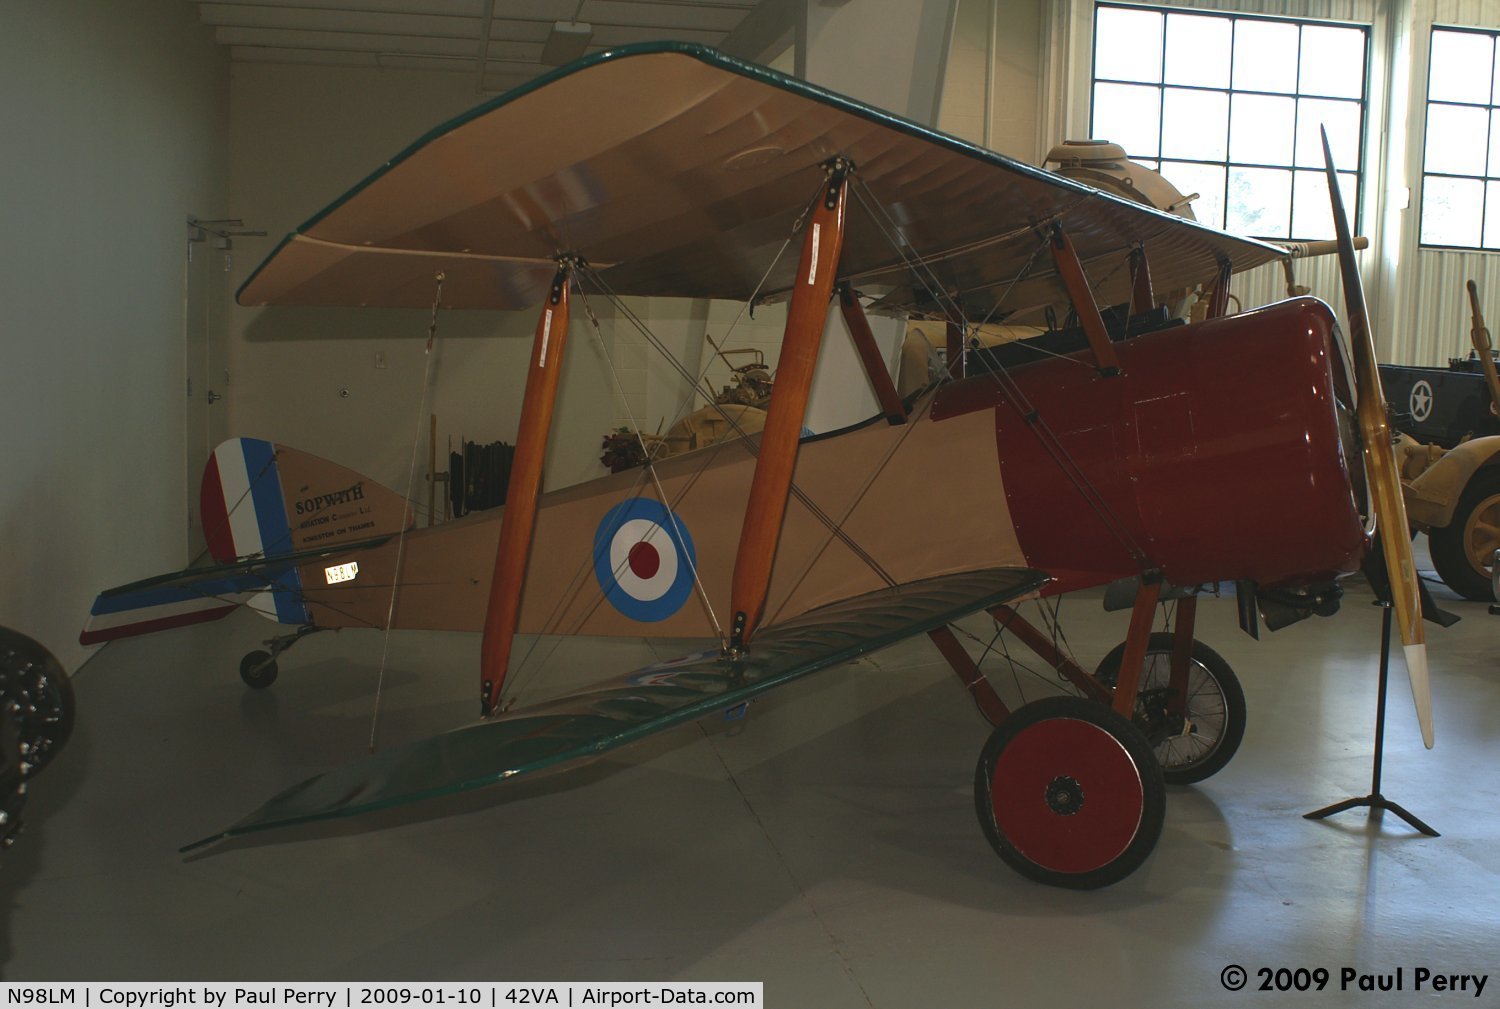 N98LM, Sopwith Pup Replica C/N 10201, A nice 3/4 scale replica of the Sopwith Pup.